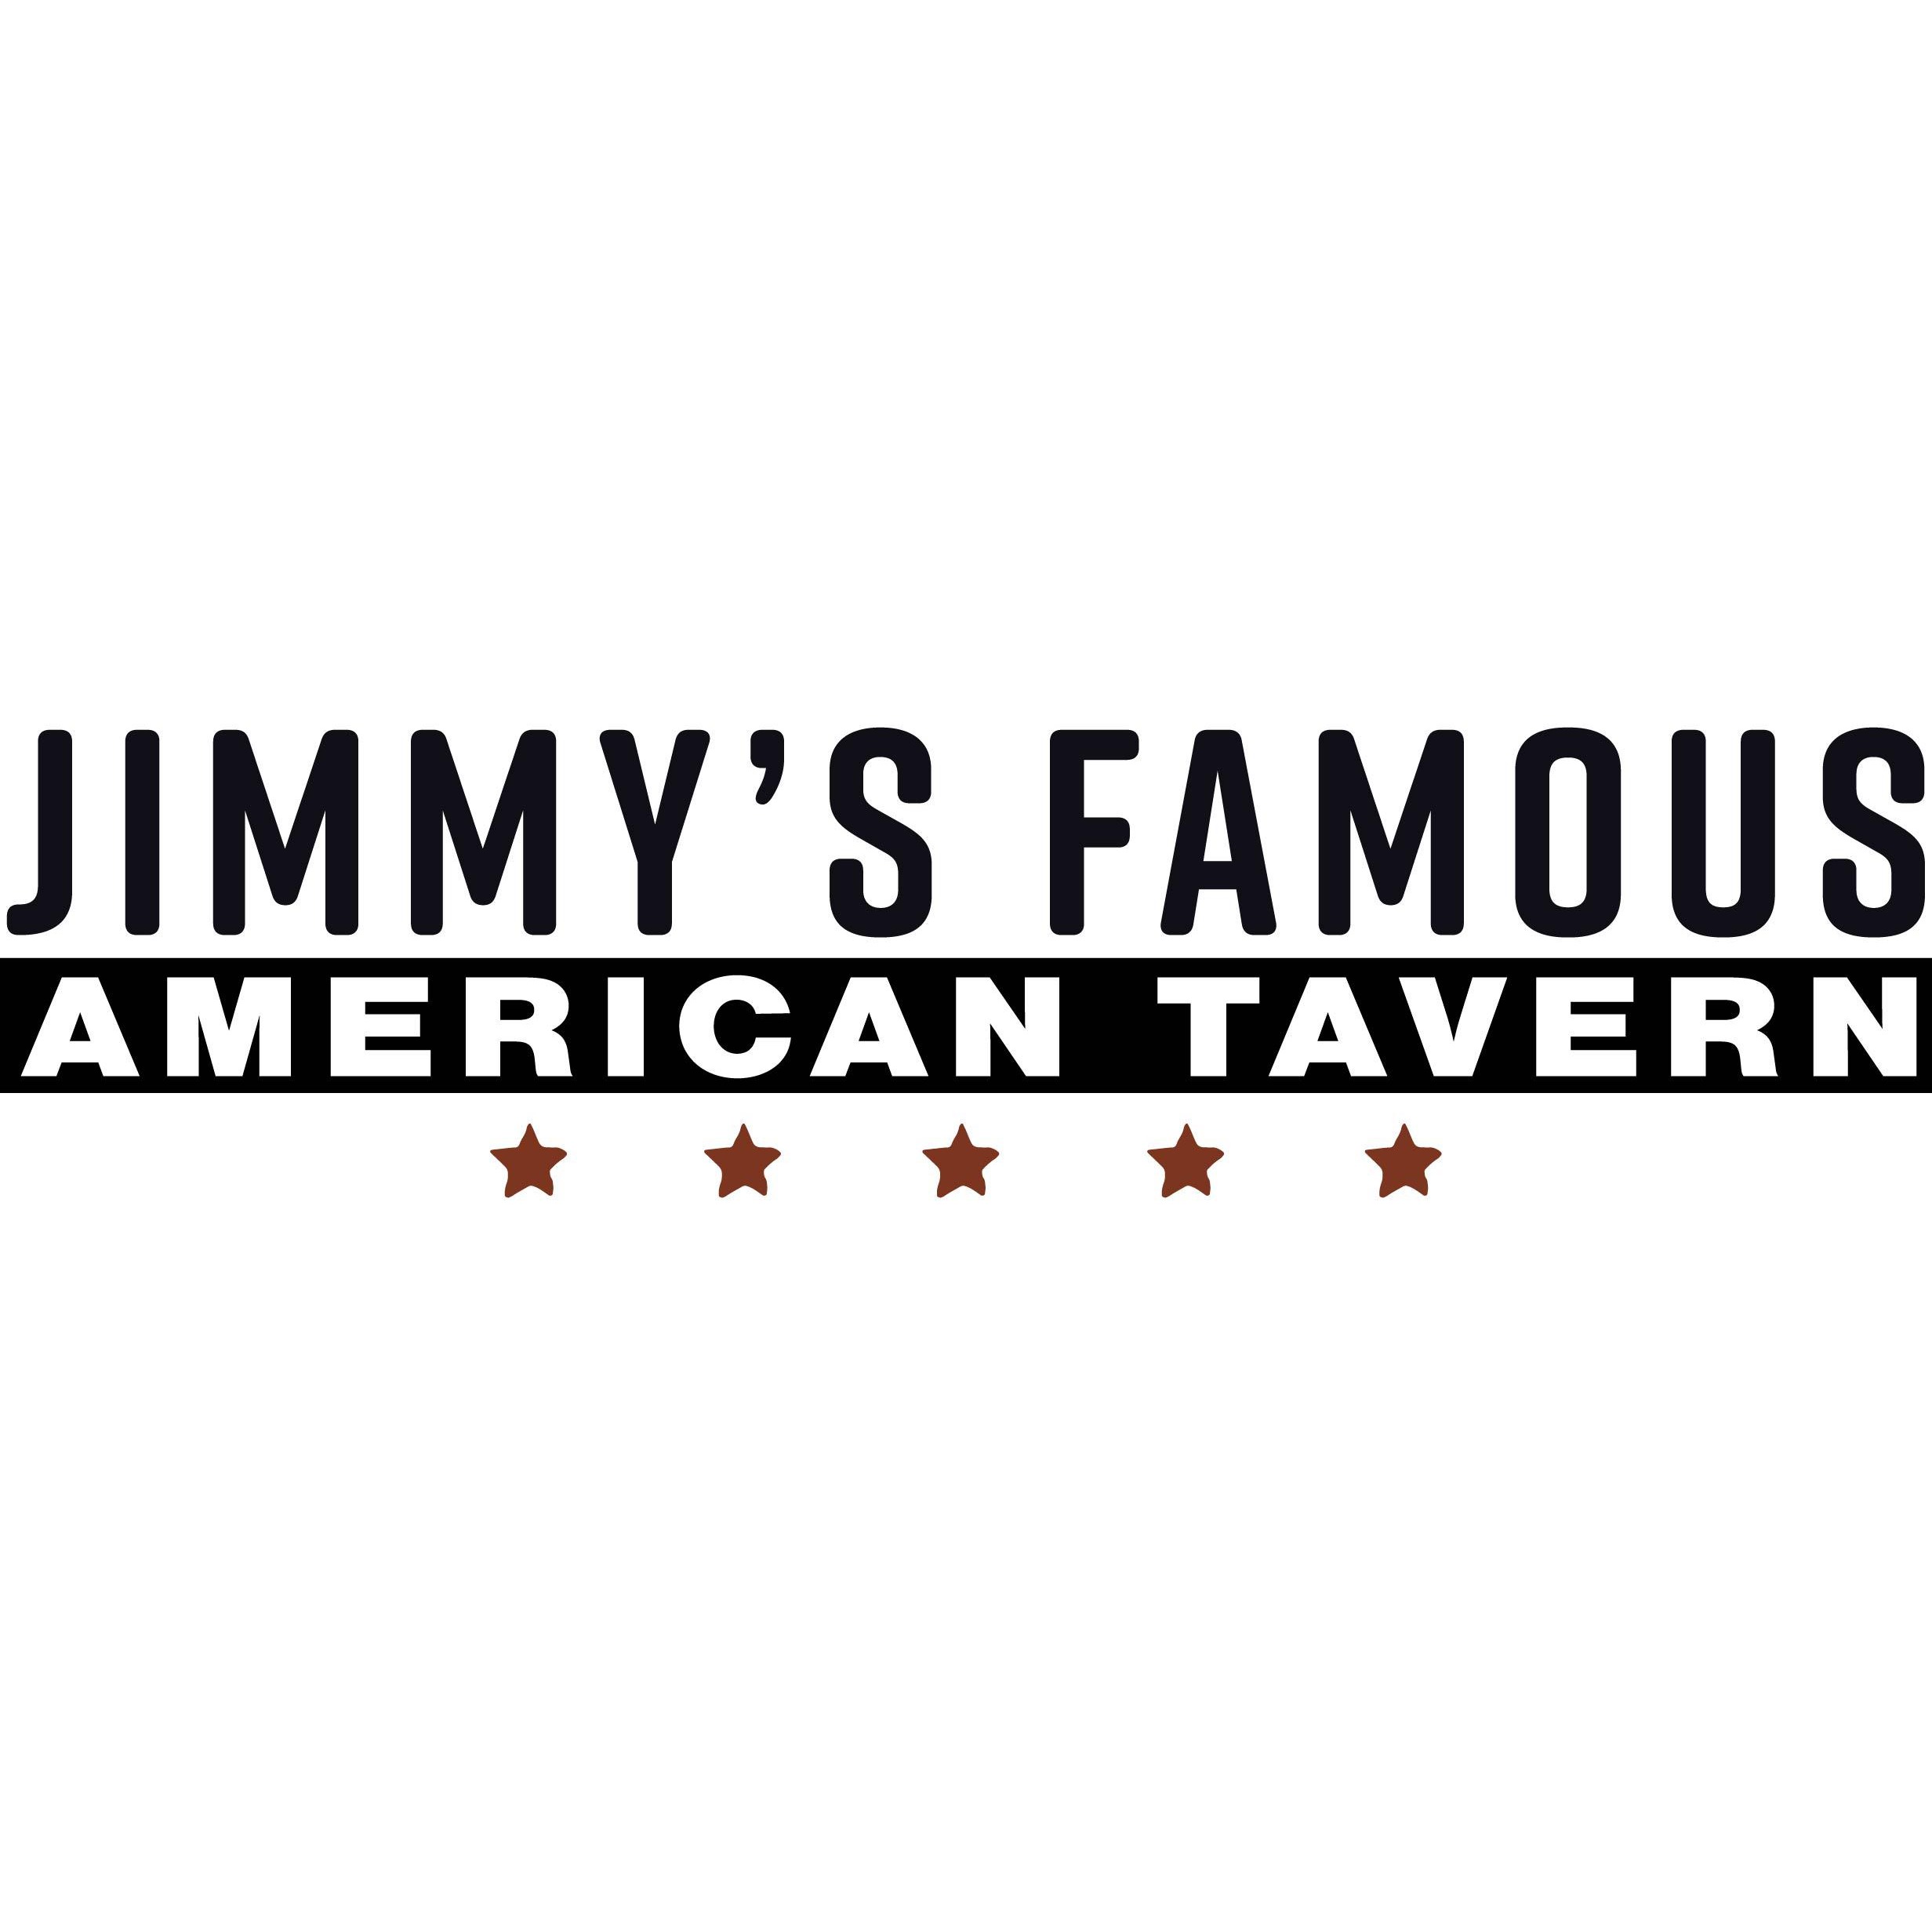 Jimmy's Famous American Tavern Photo